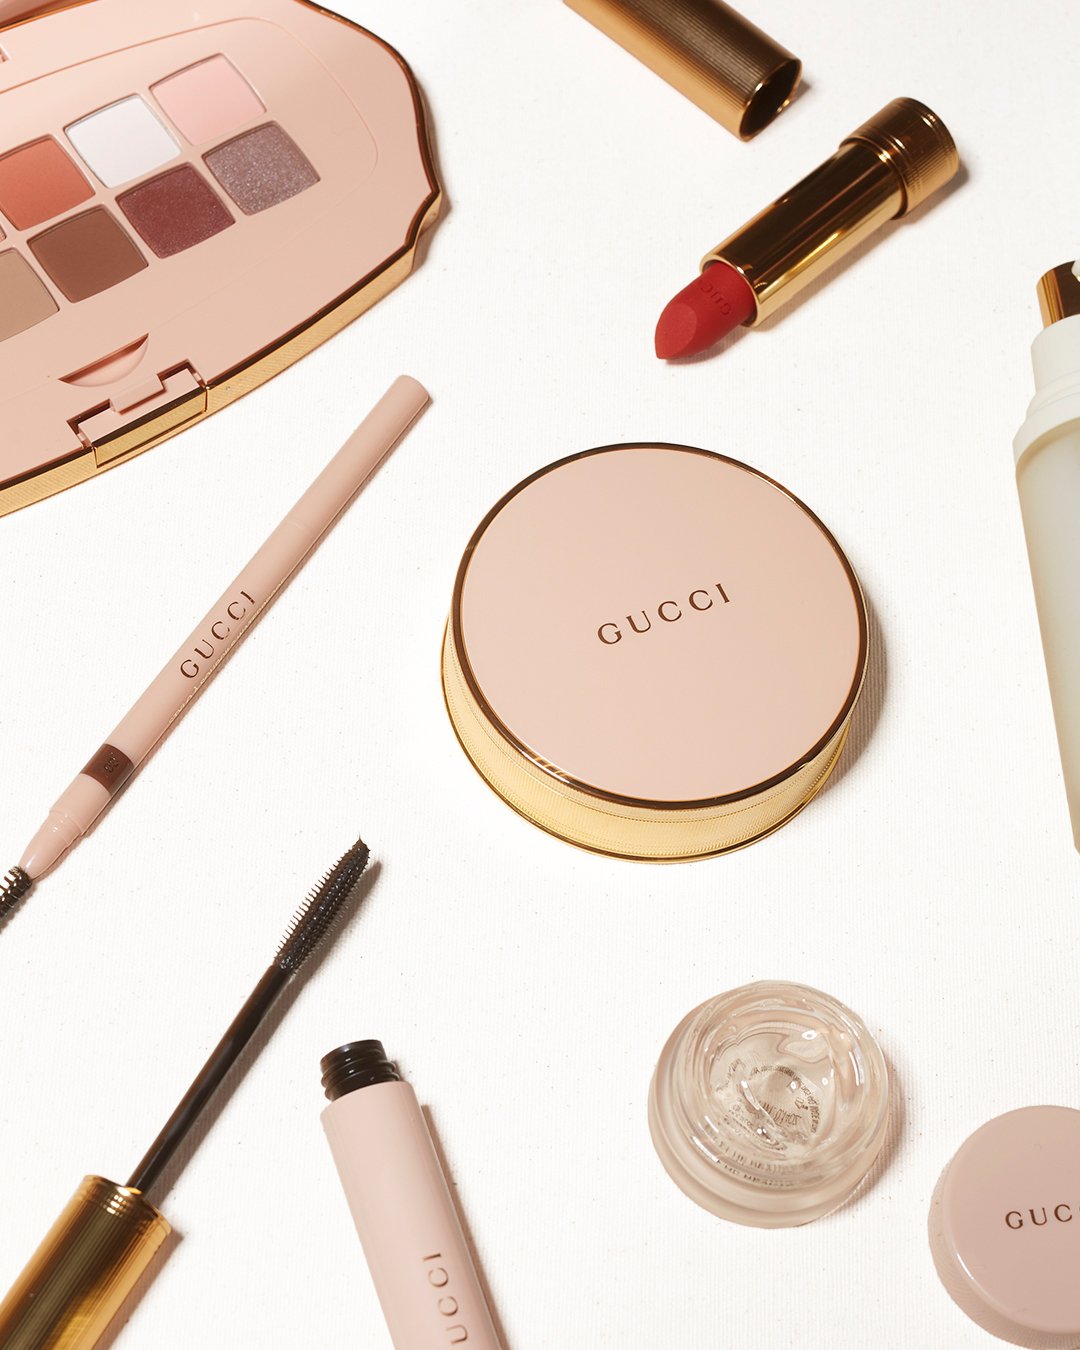  Gucci Beauty Collection by Alessandro Michele 